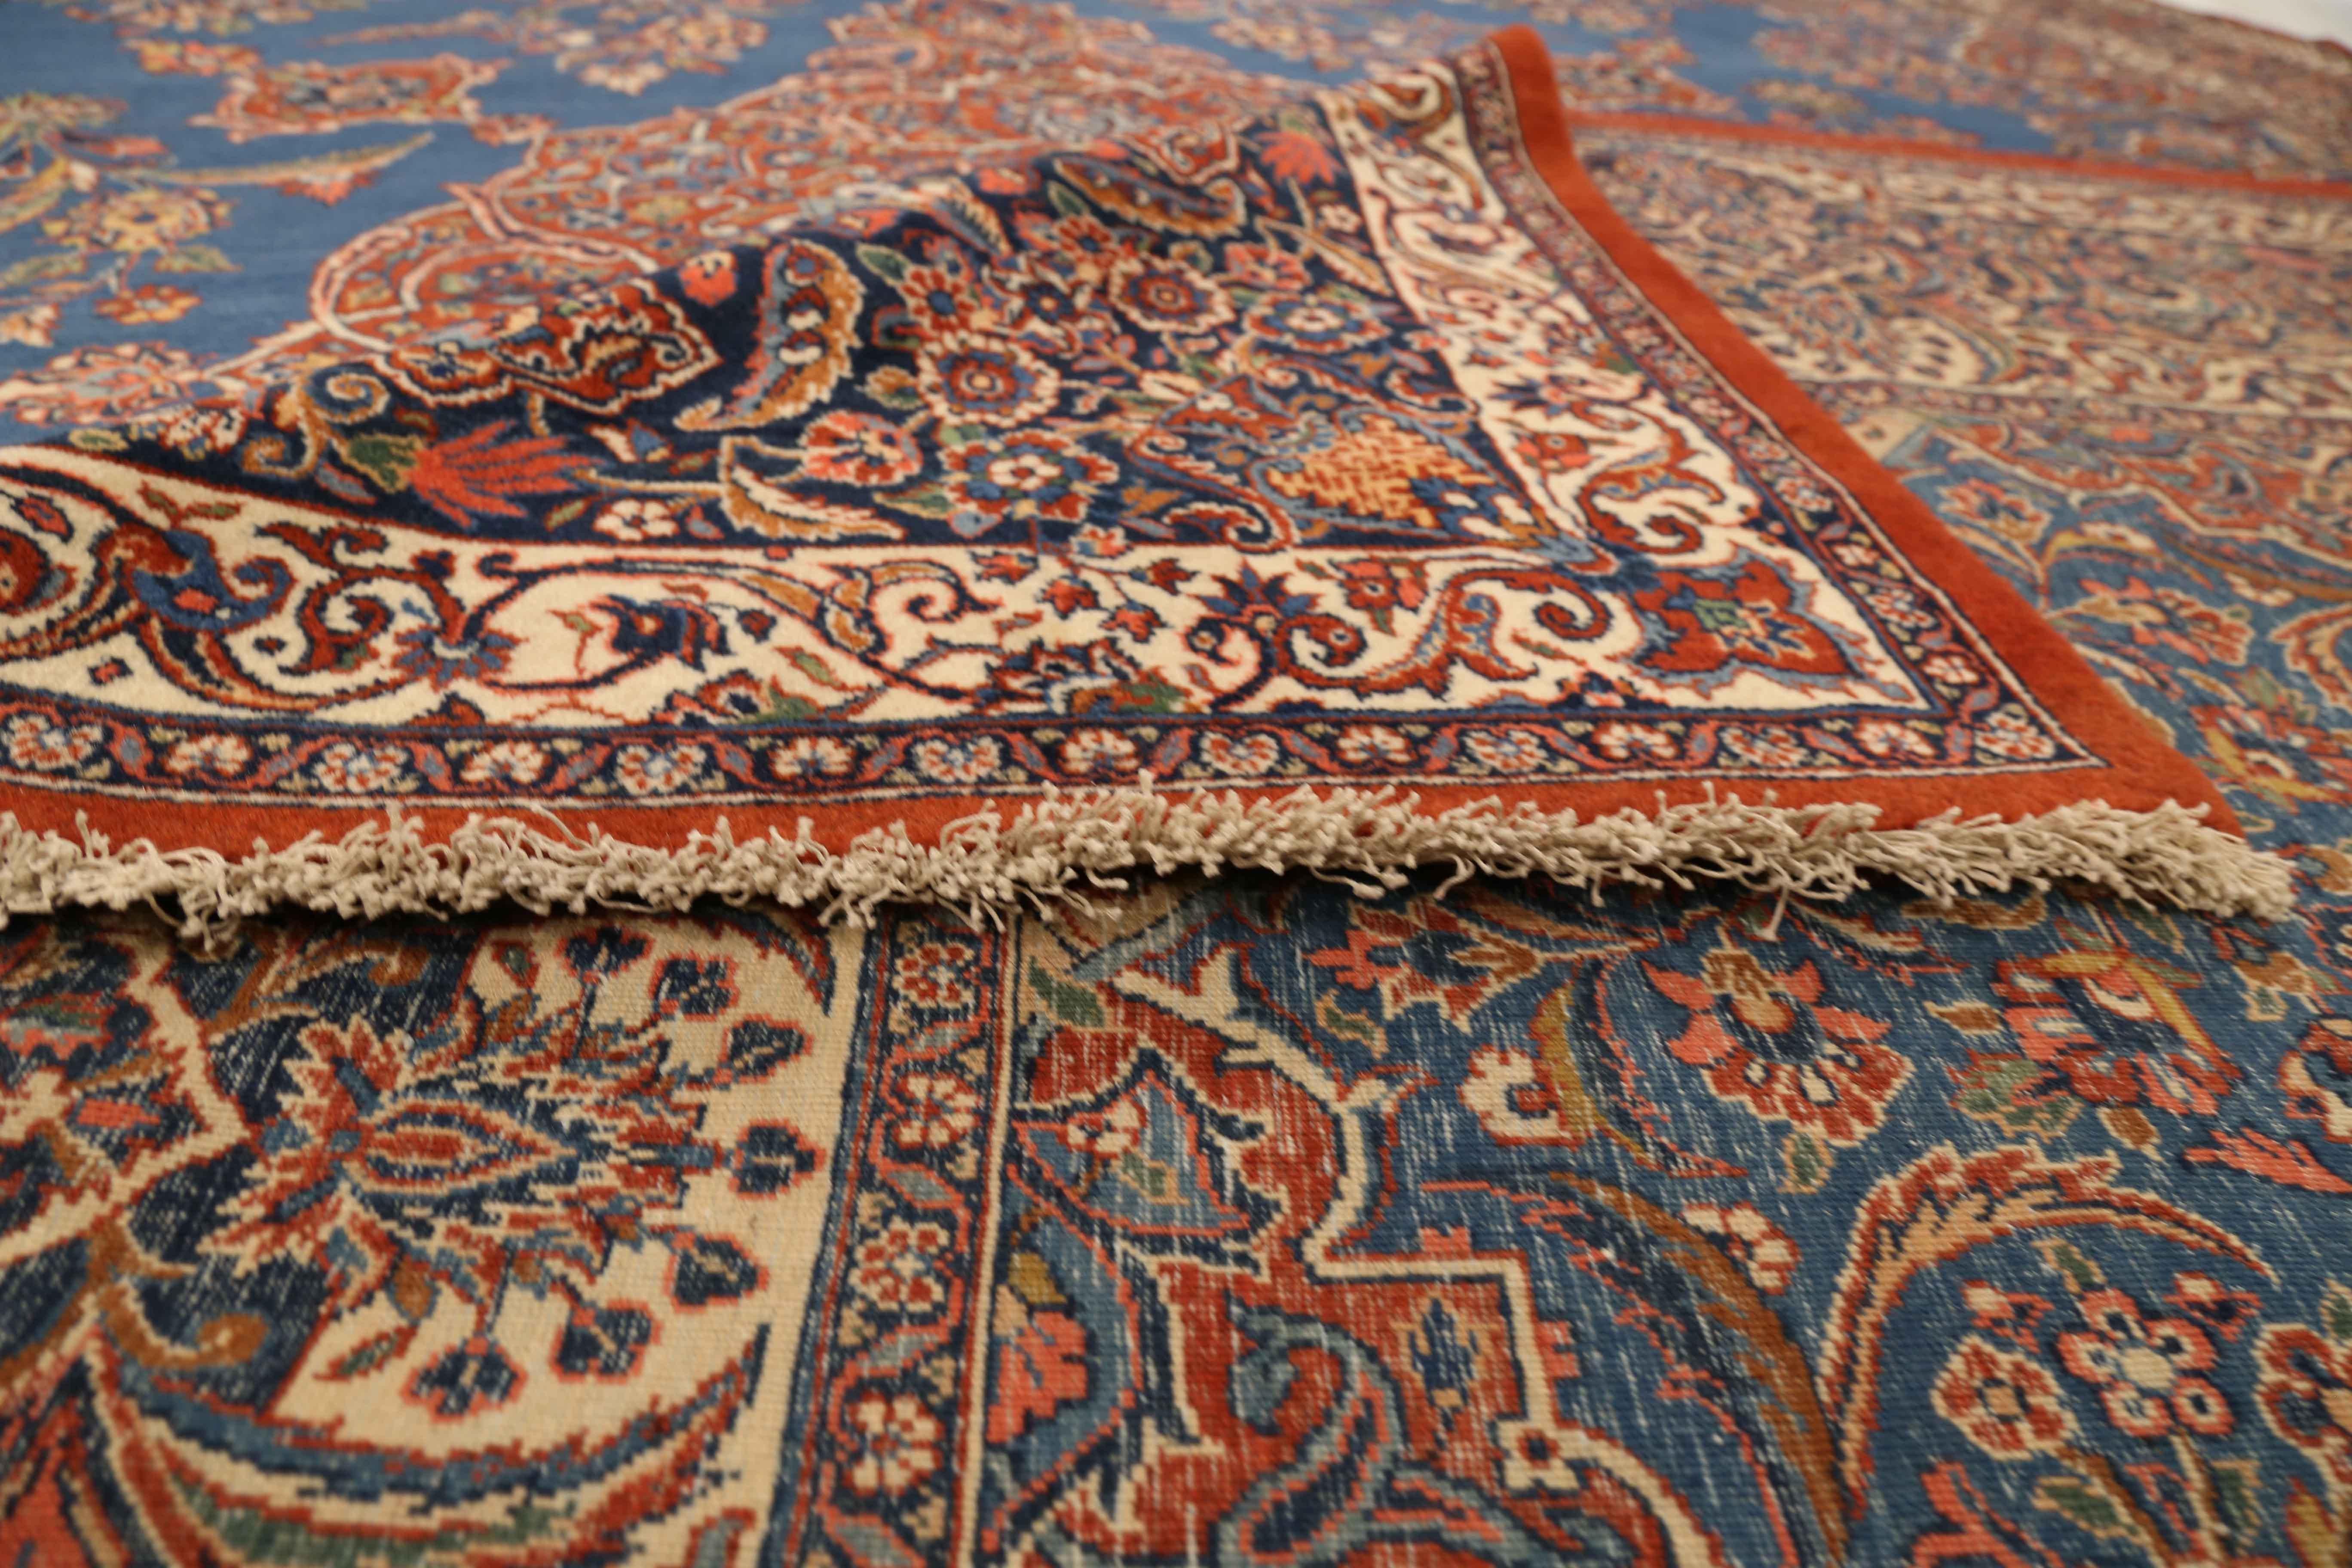 1920s era antique Persian rug handmade with the highest quality of sheep wool and the richest blend of organic dyes in the Ghazvin region also known as Qazvin which was once the capital of the Safavid Empire. It features an elaborate floral